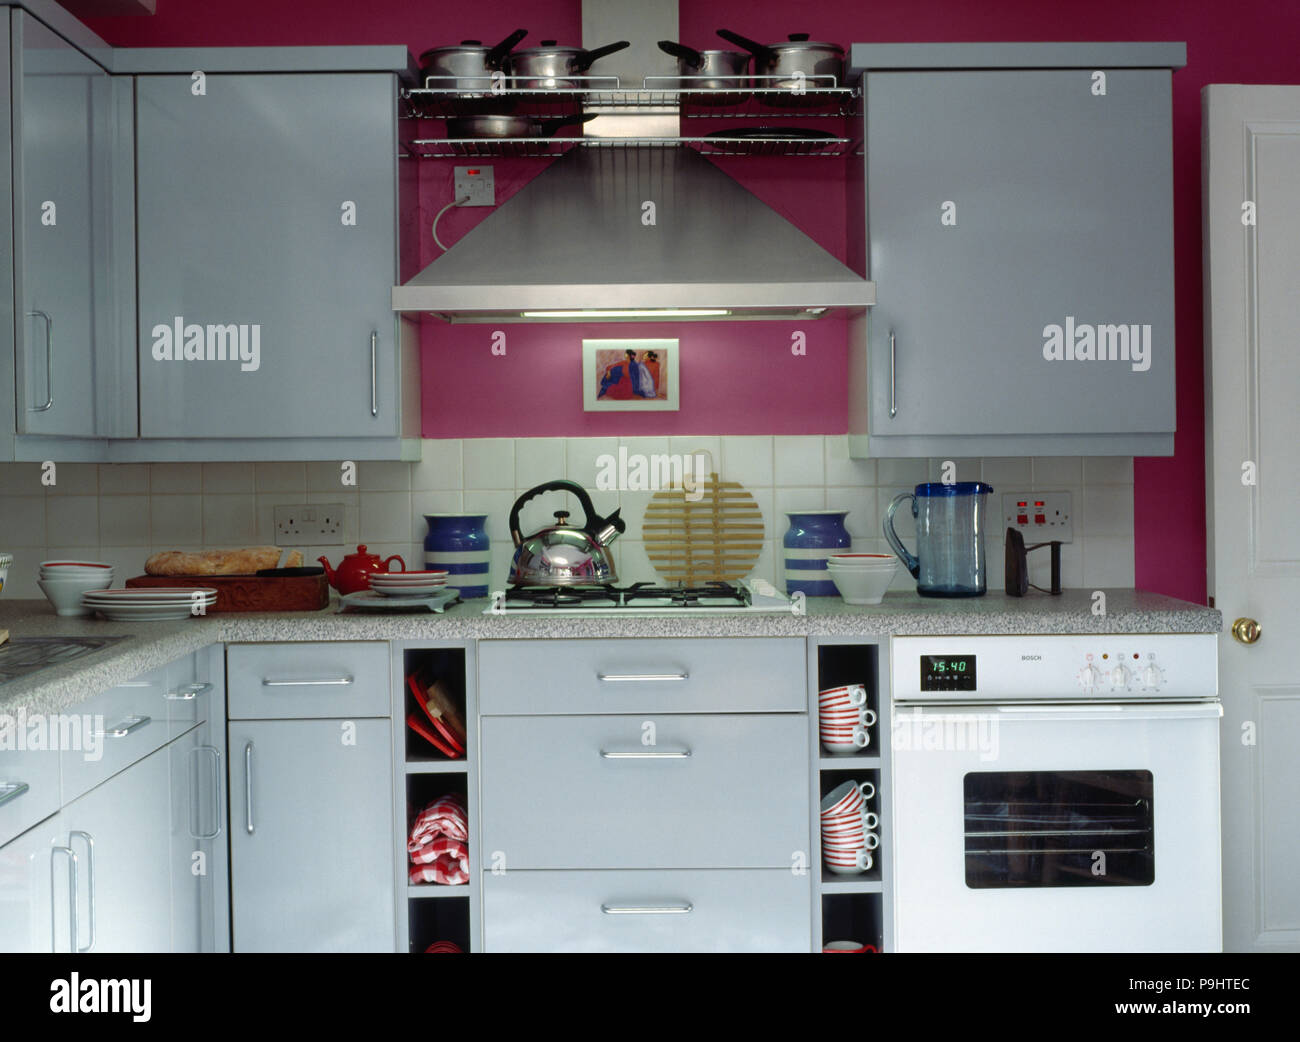 Stainless steel extractor above kettle on hob in small modern pink kitchen with fitted white units and white oven Stock Photo